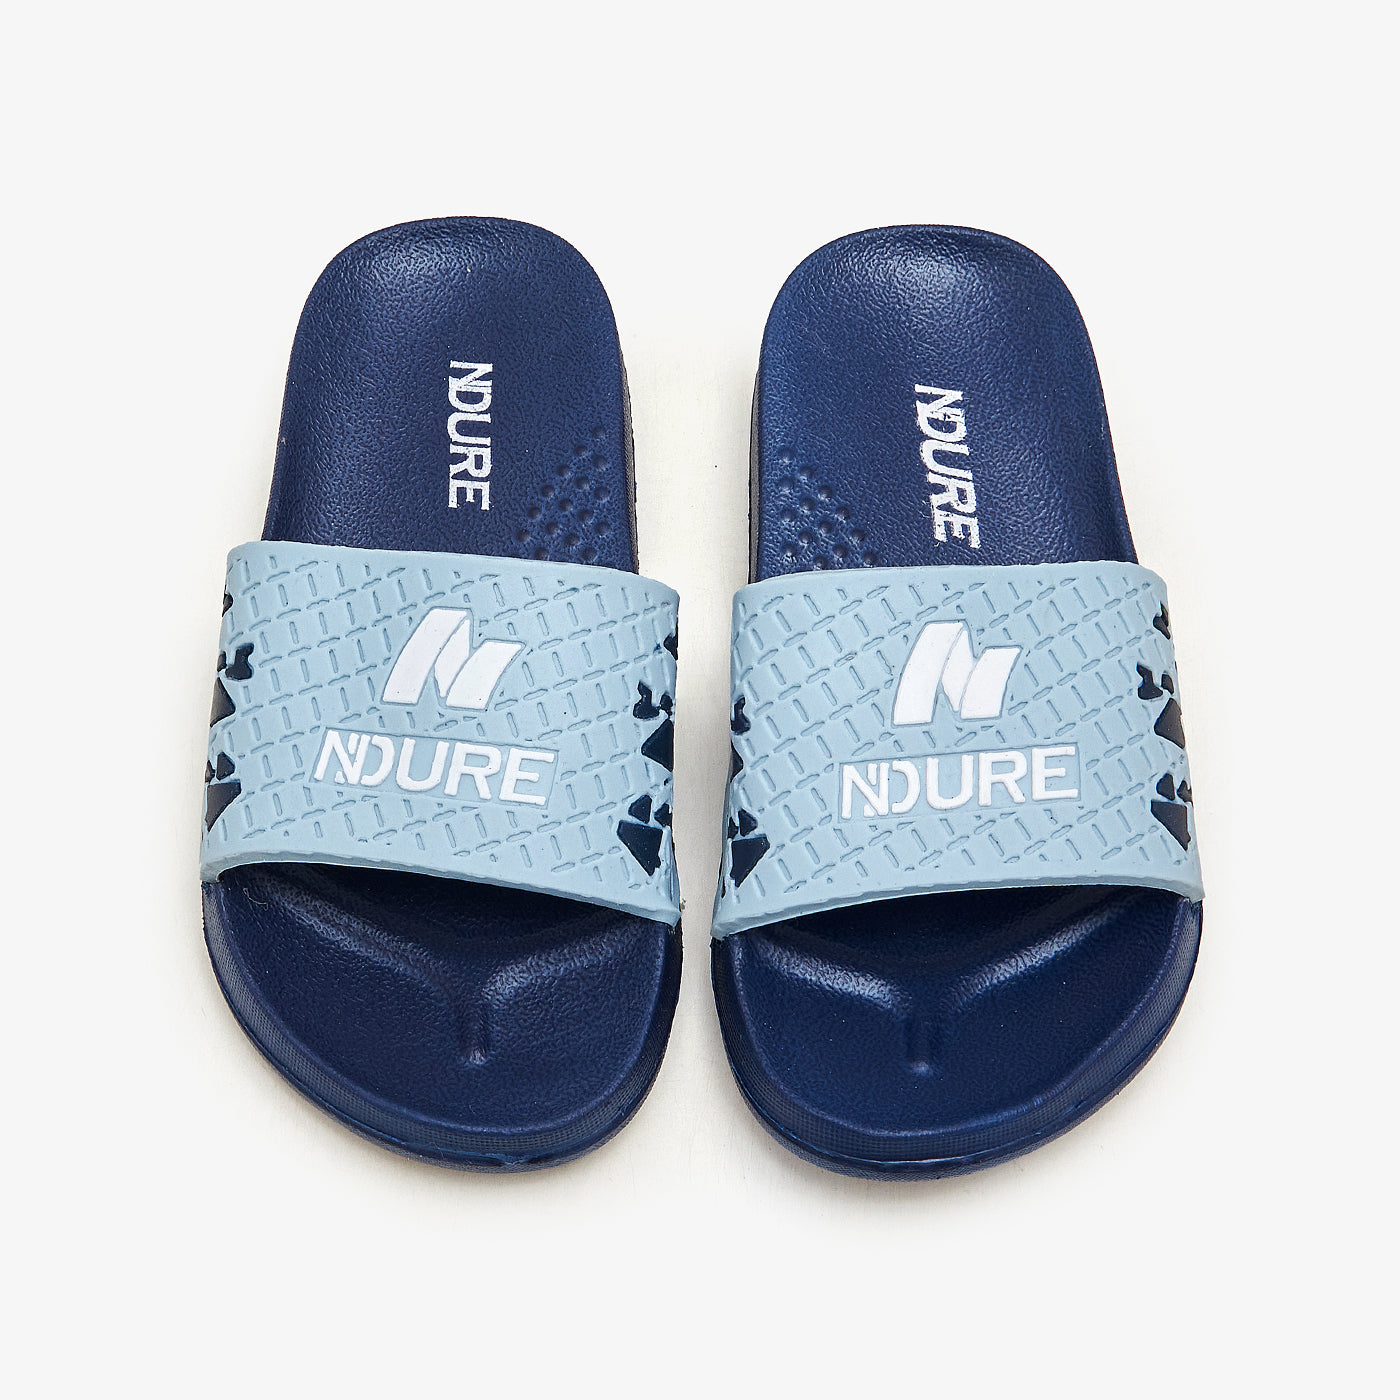 Buy FEETNUP orthopedic slippers for men | sleepers for men daily use |  orthopaedic slipper mens | flip flop daily use | chappal | Slippers for Boys  and Gents Home Slides for